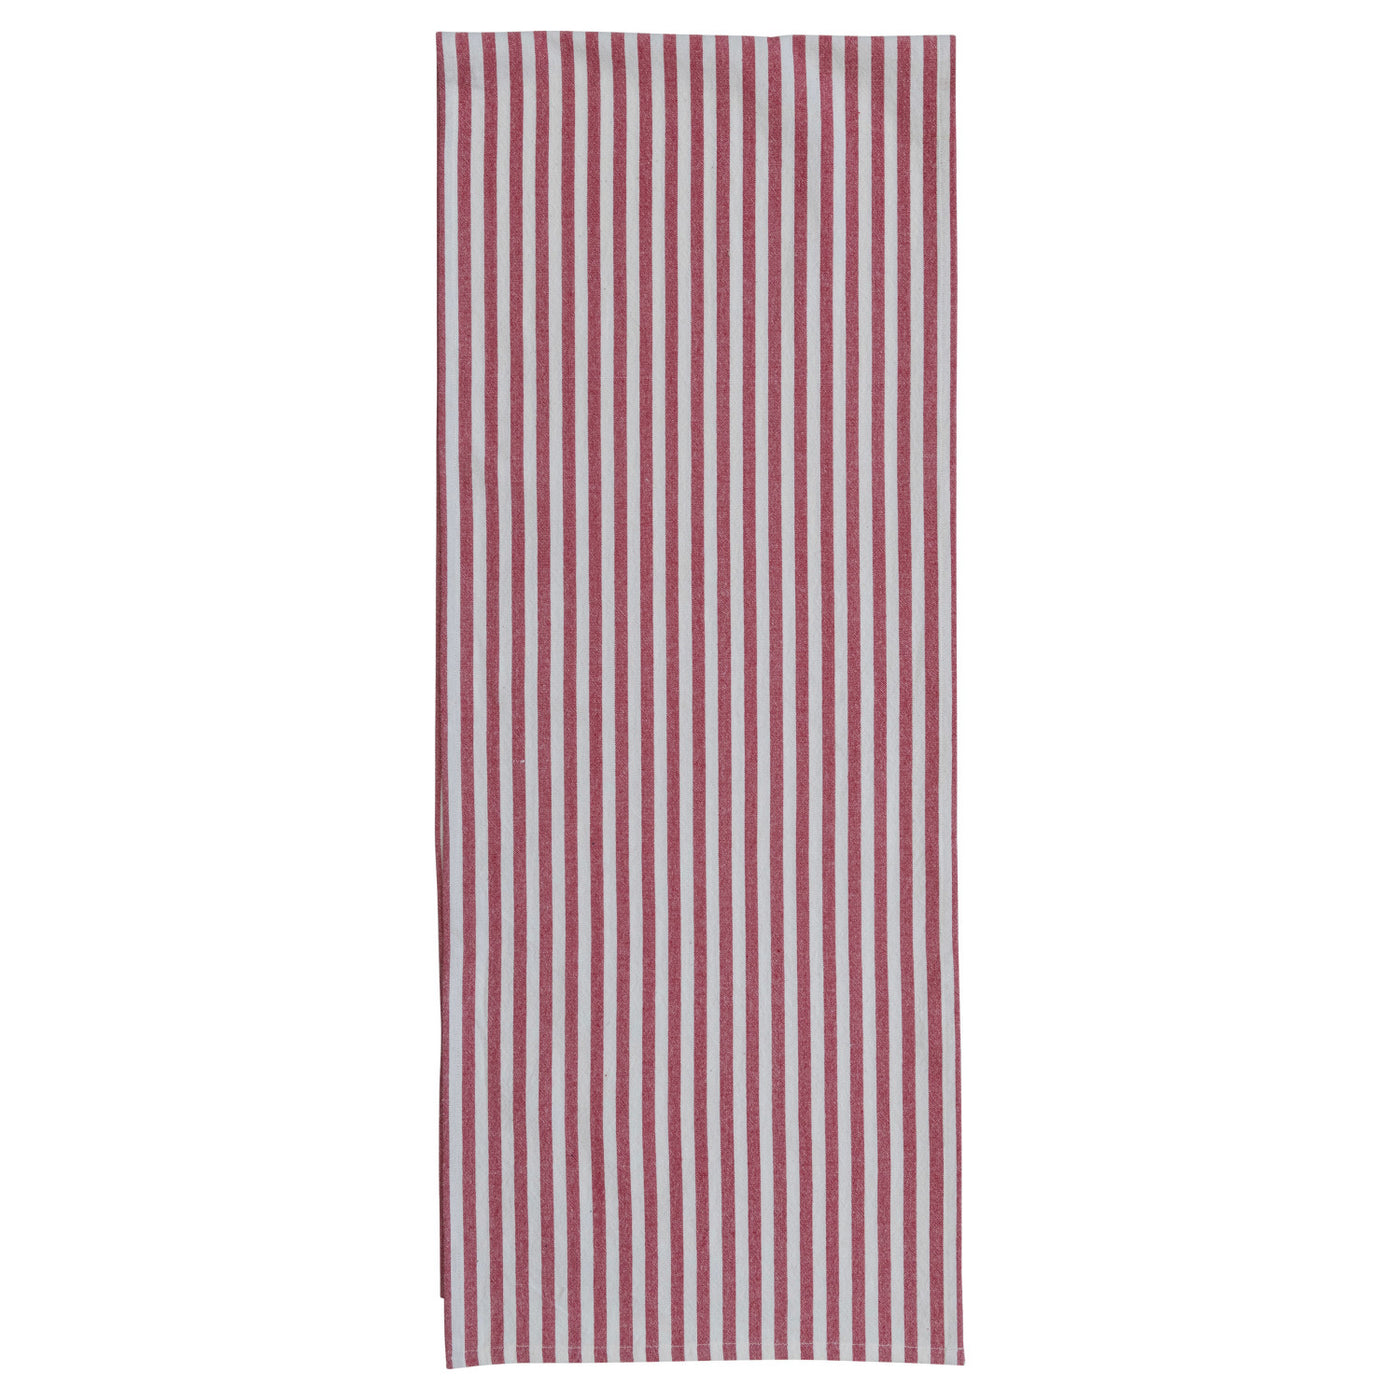 72"L x 14"W Woven Cotton Table Runner w/ Stripes, Red & White